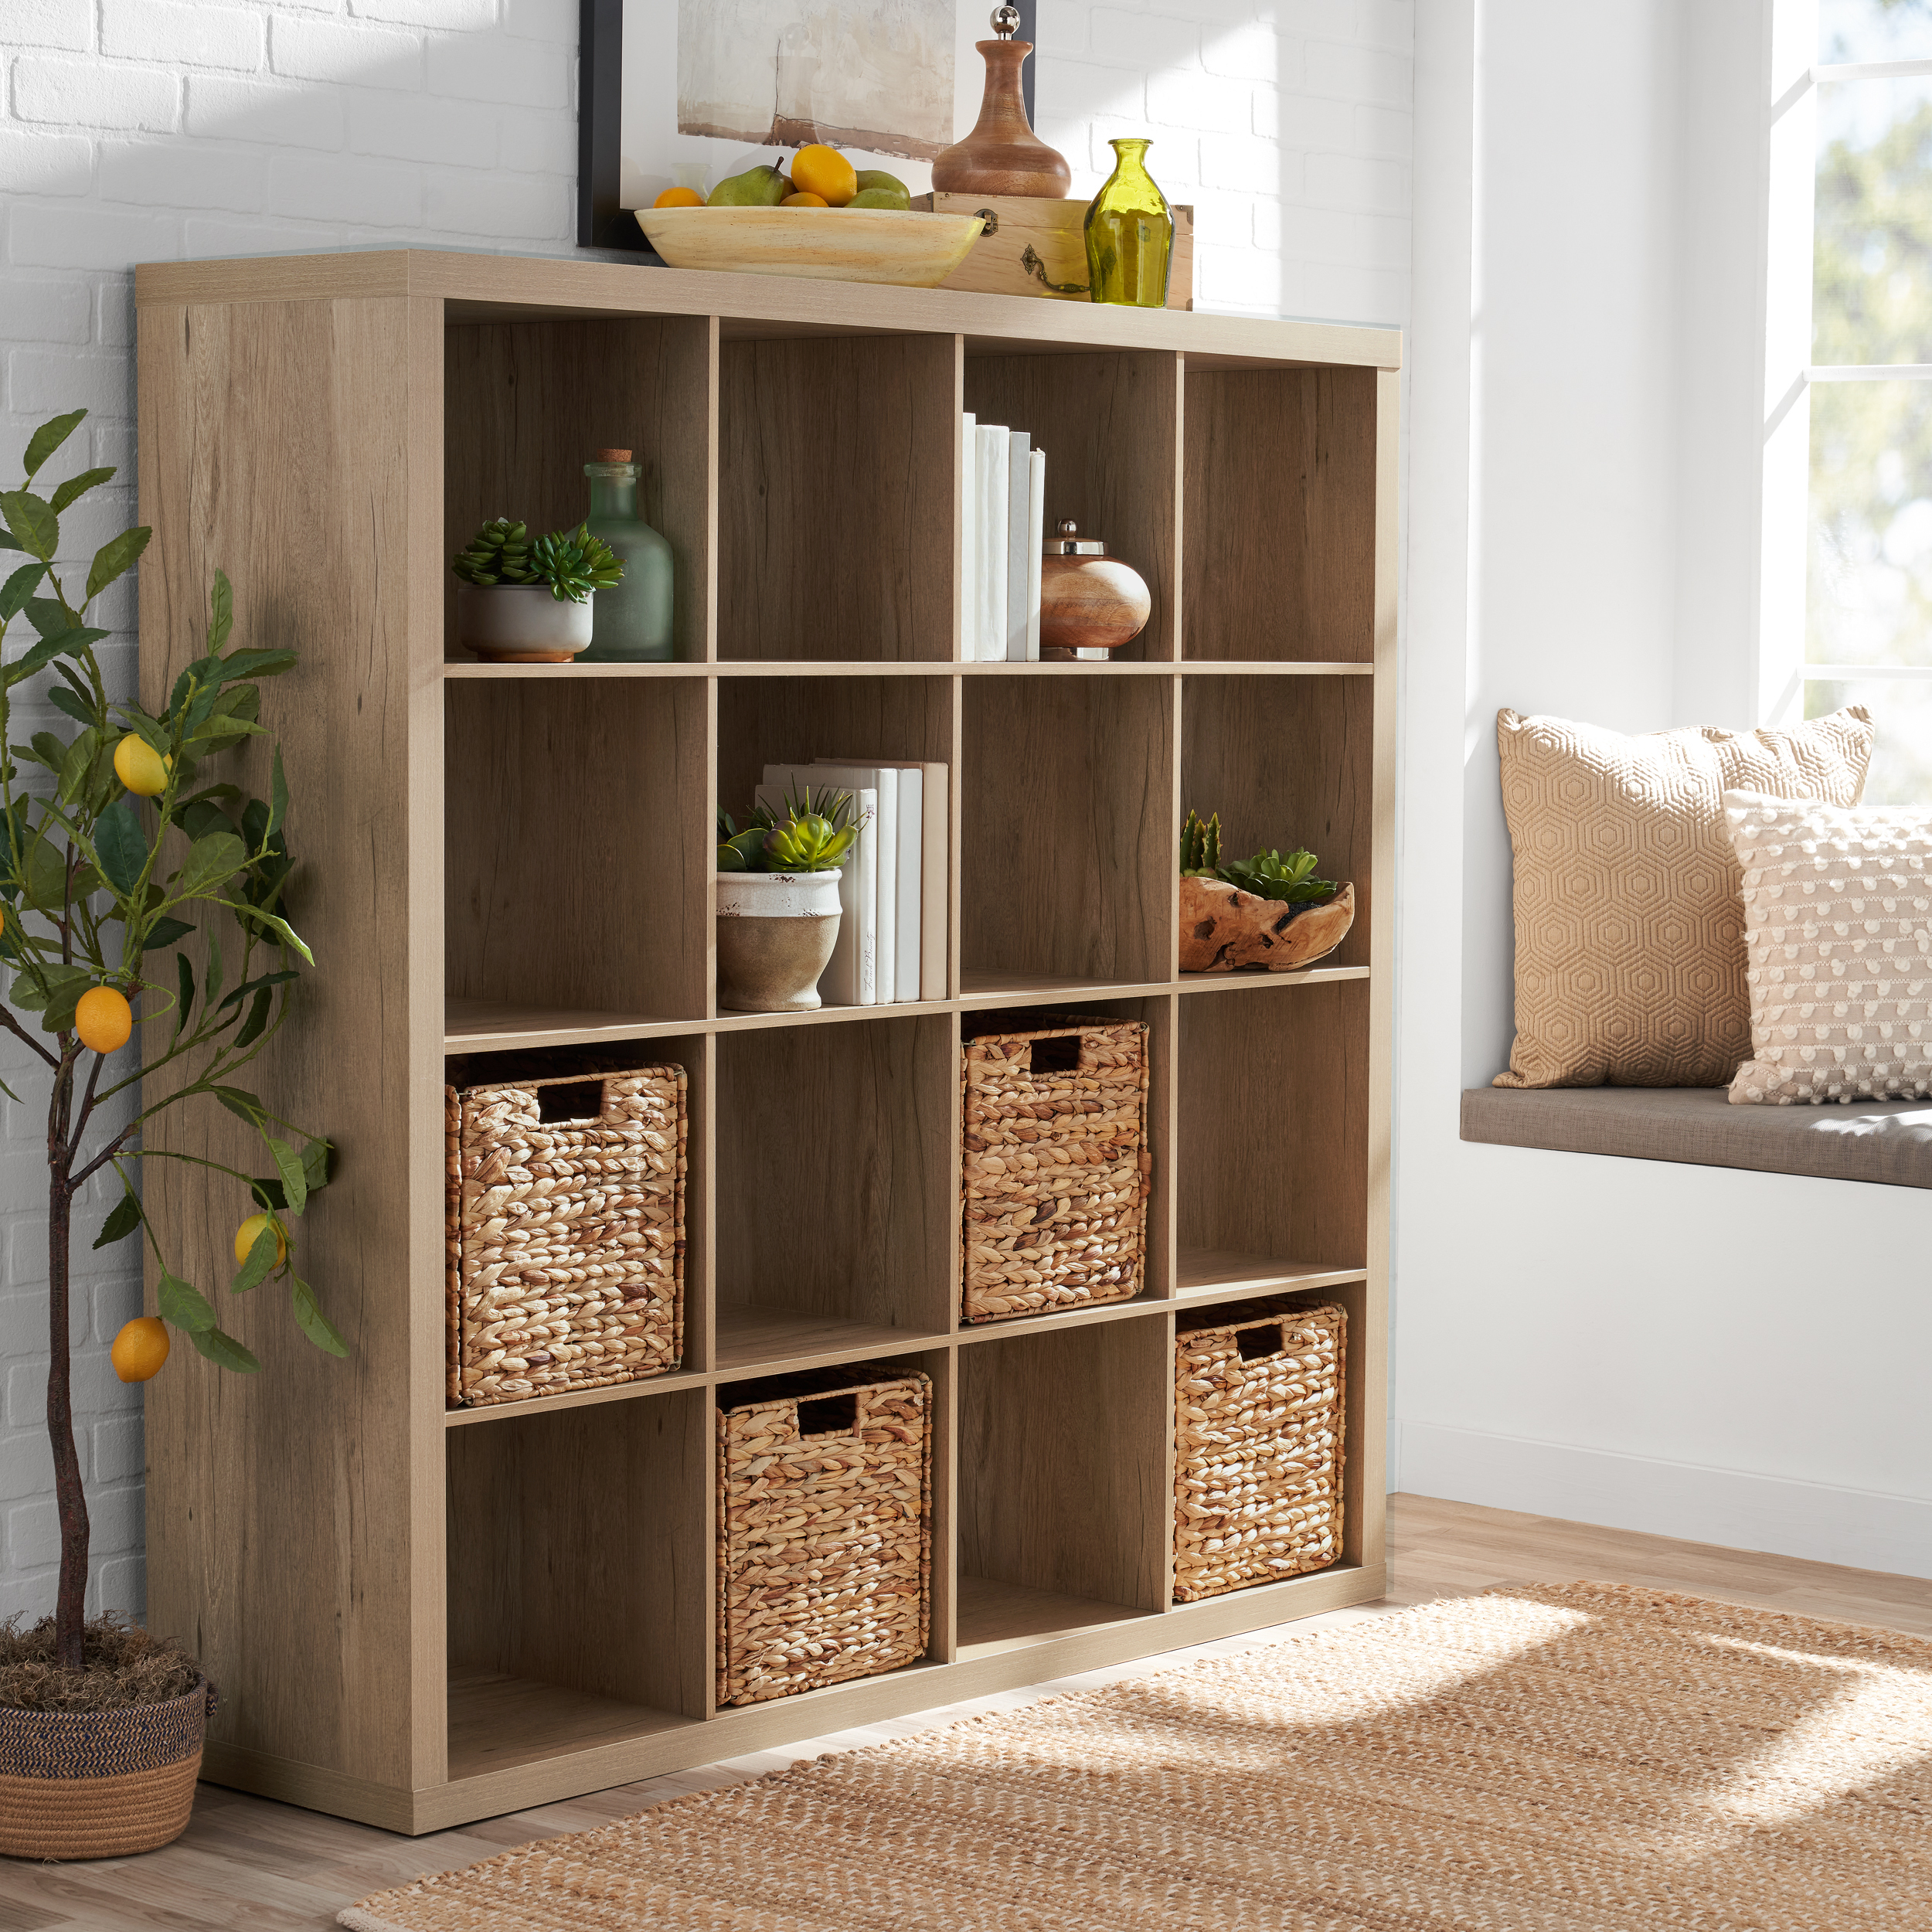 Better Homes & Gardens 16-Cube Storage Organizer, Natural - image 1 of 6